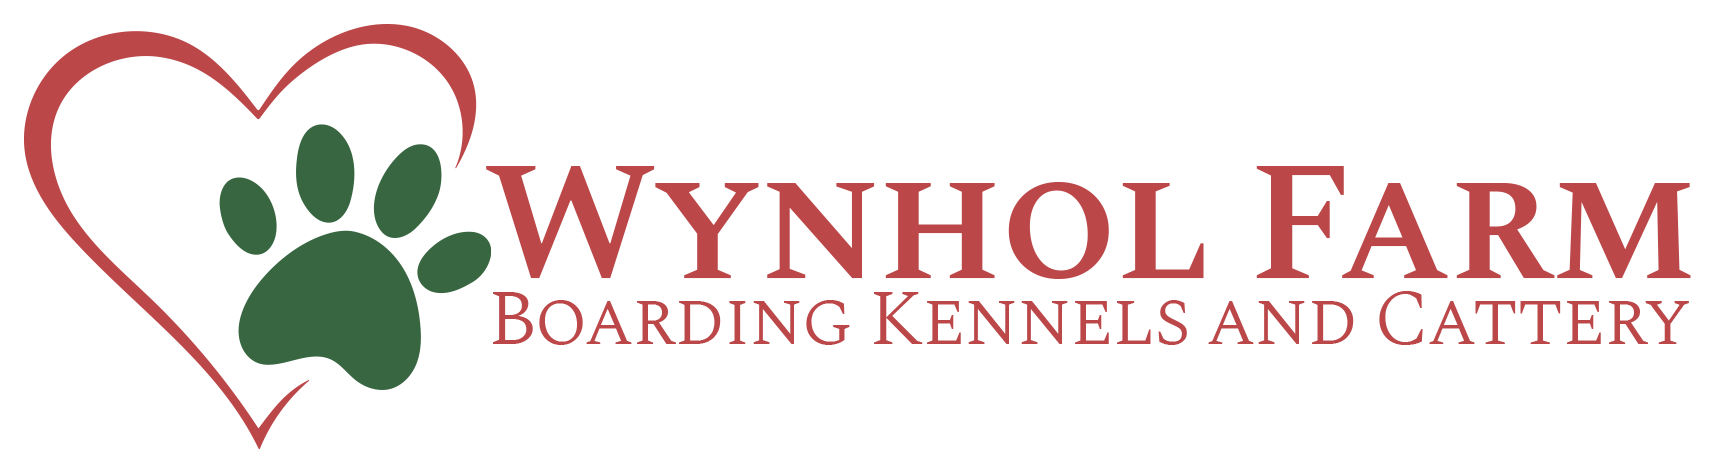 Wynhol Farm Boarding Kennels and Cattery